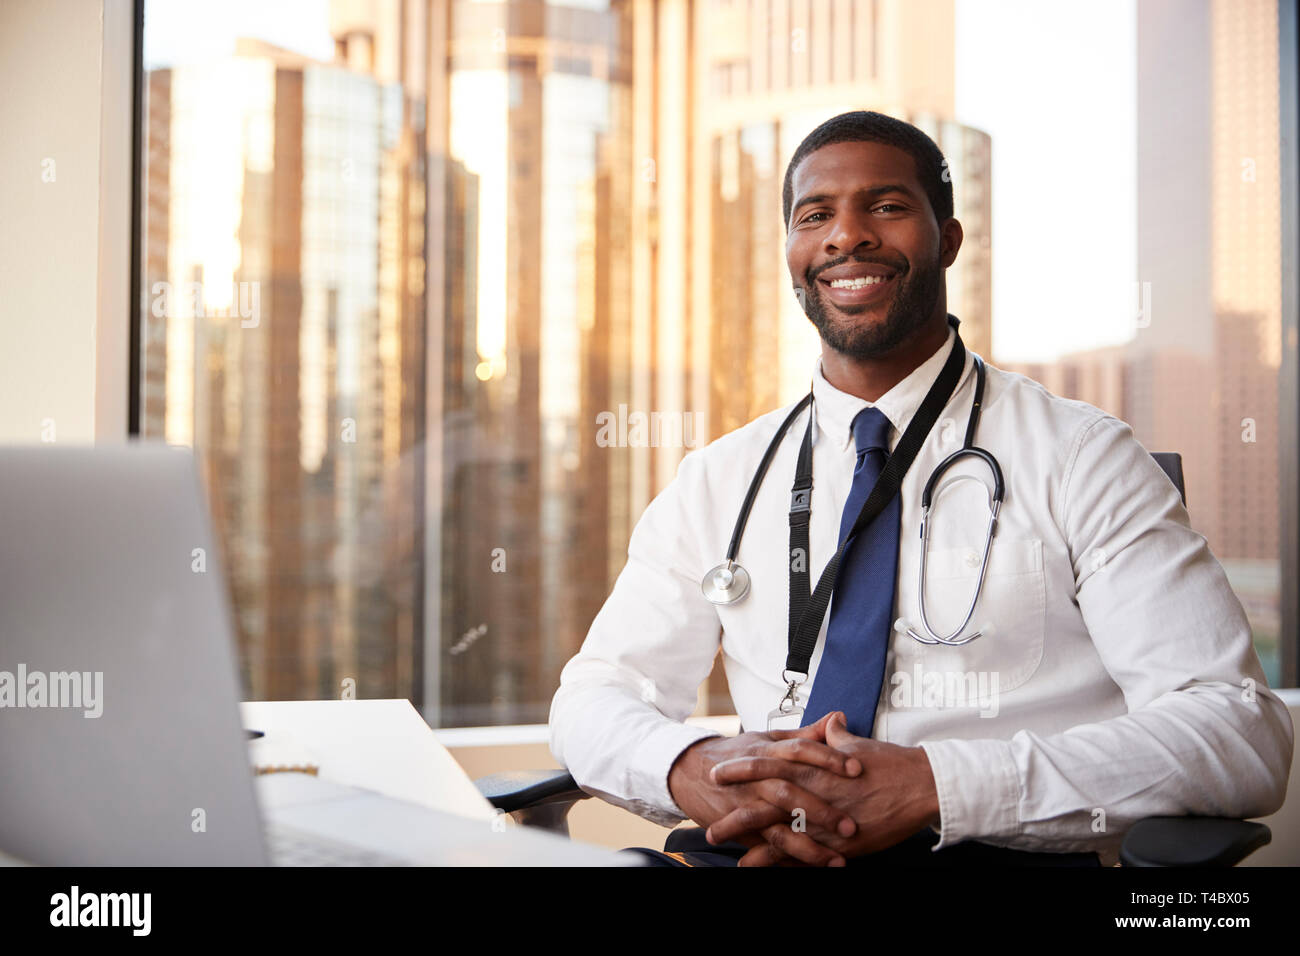 Portrait Of Smiling Male Doctor With Stethoscope In Hospital Office Stock Photo